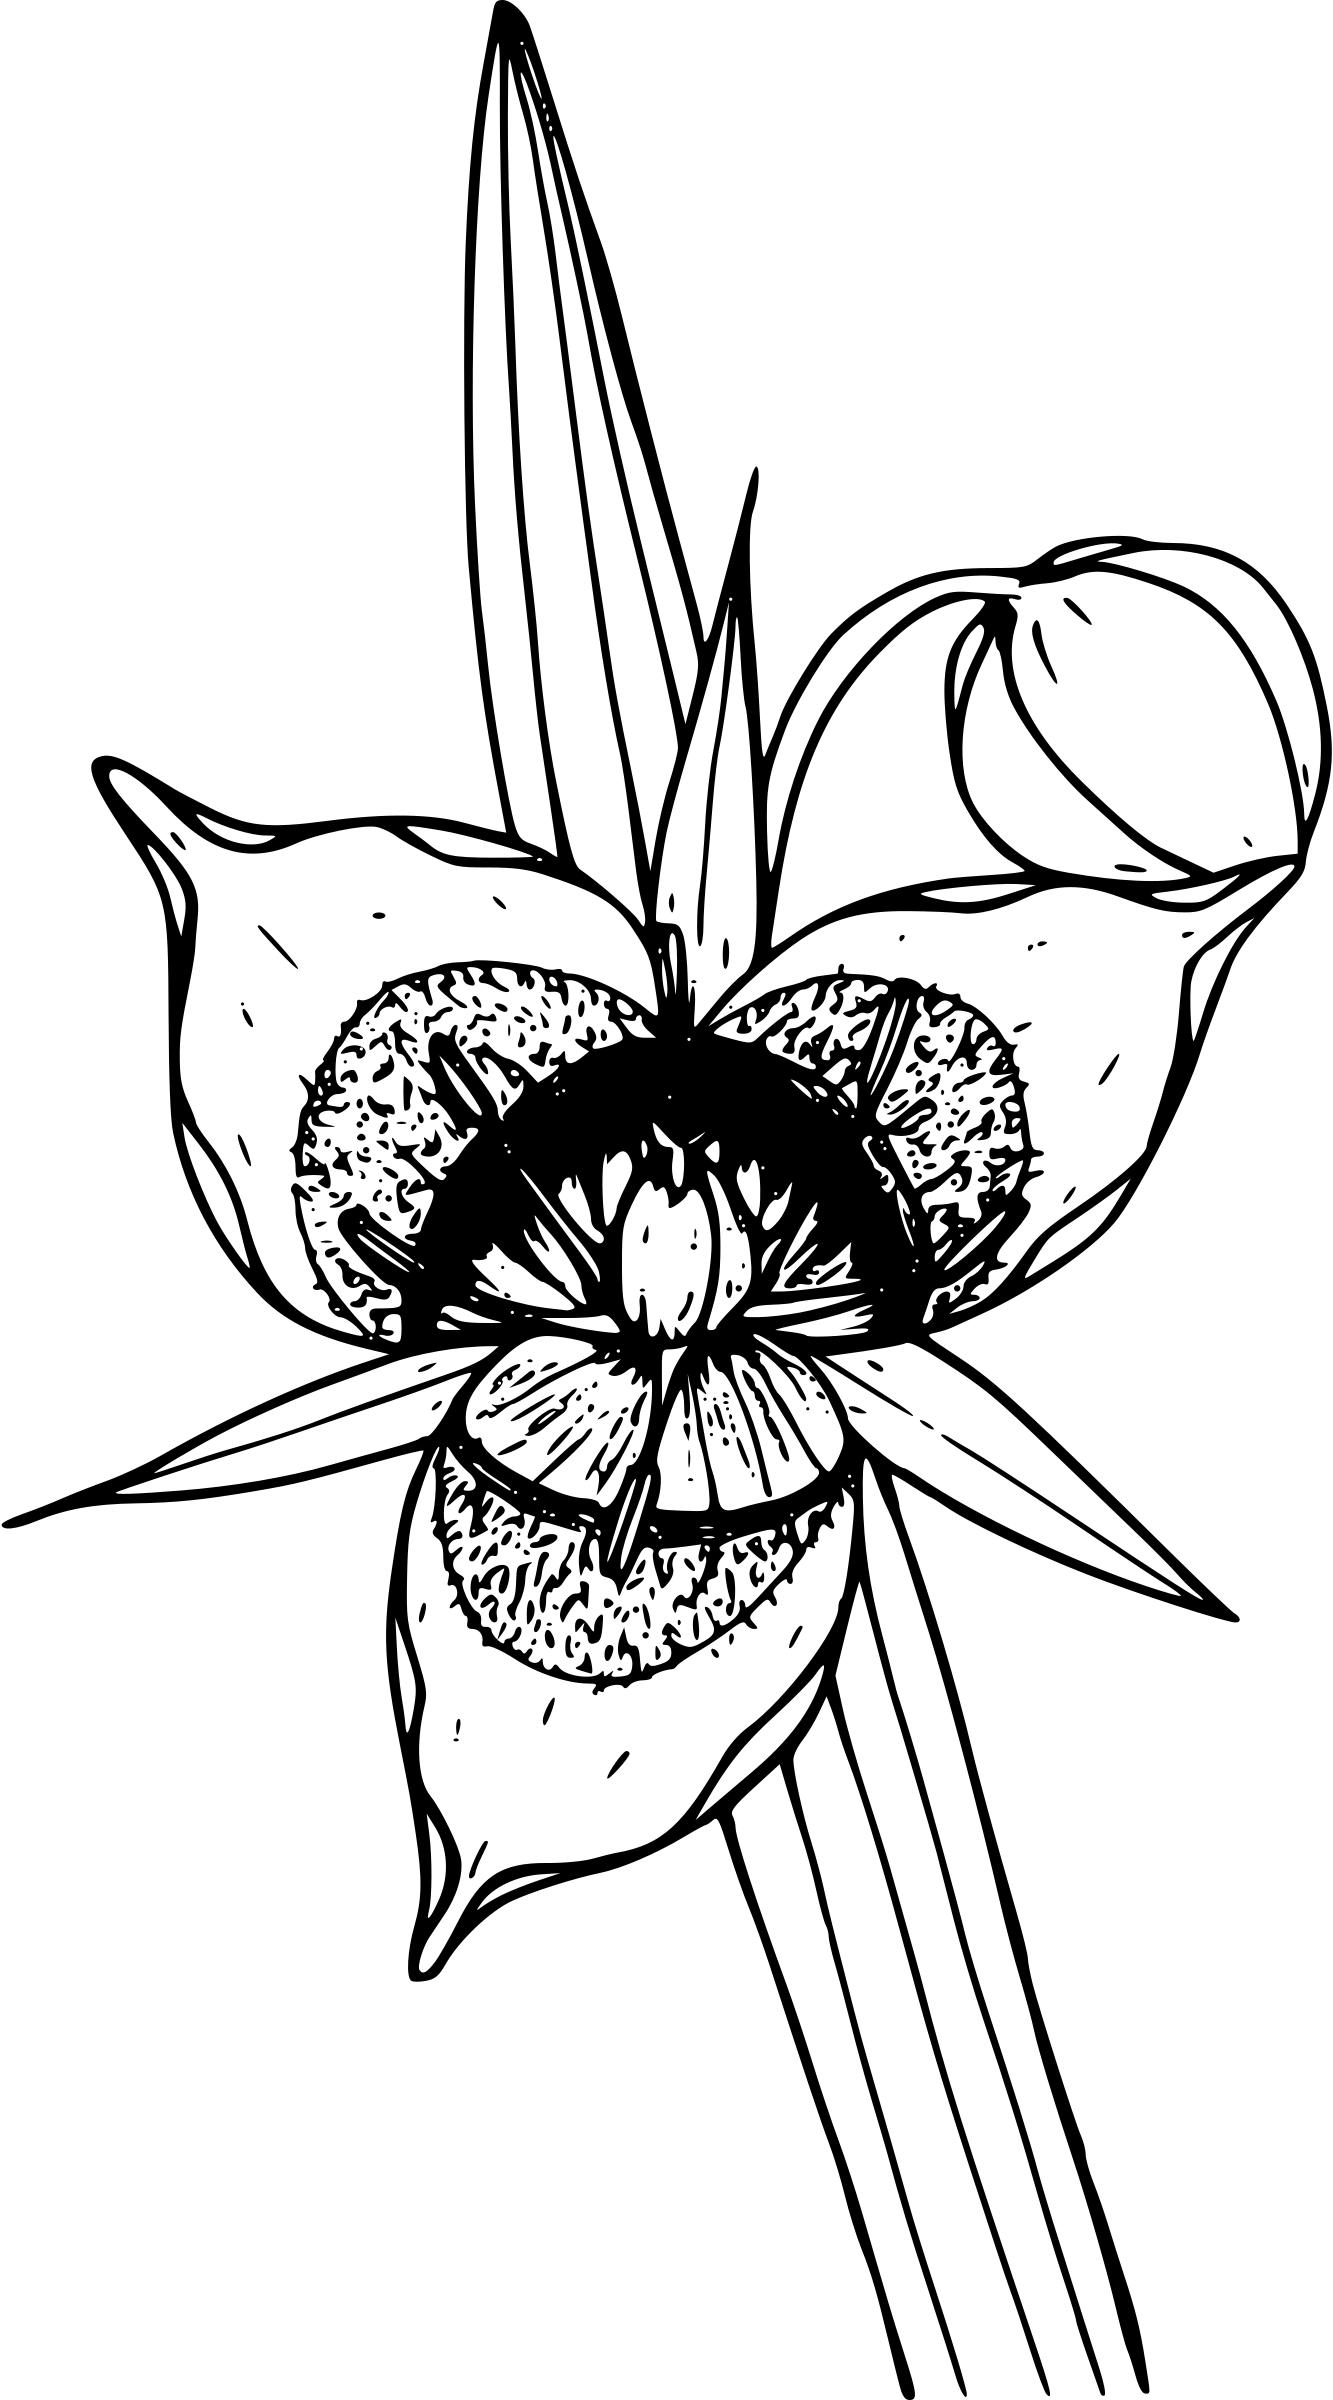 Cat's ear lily png